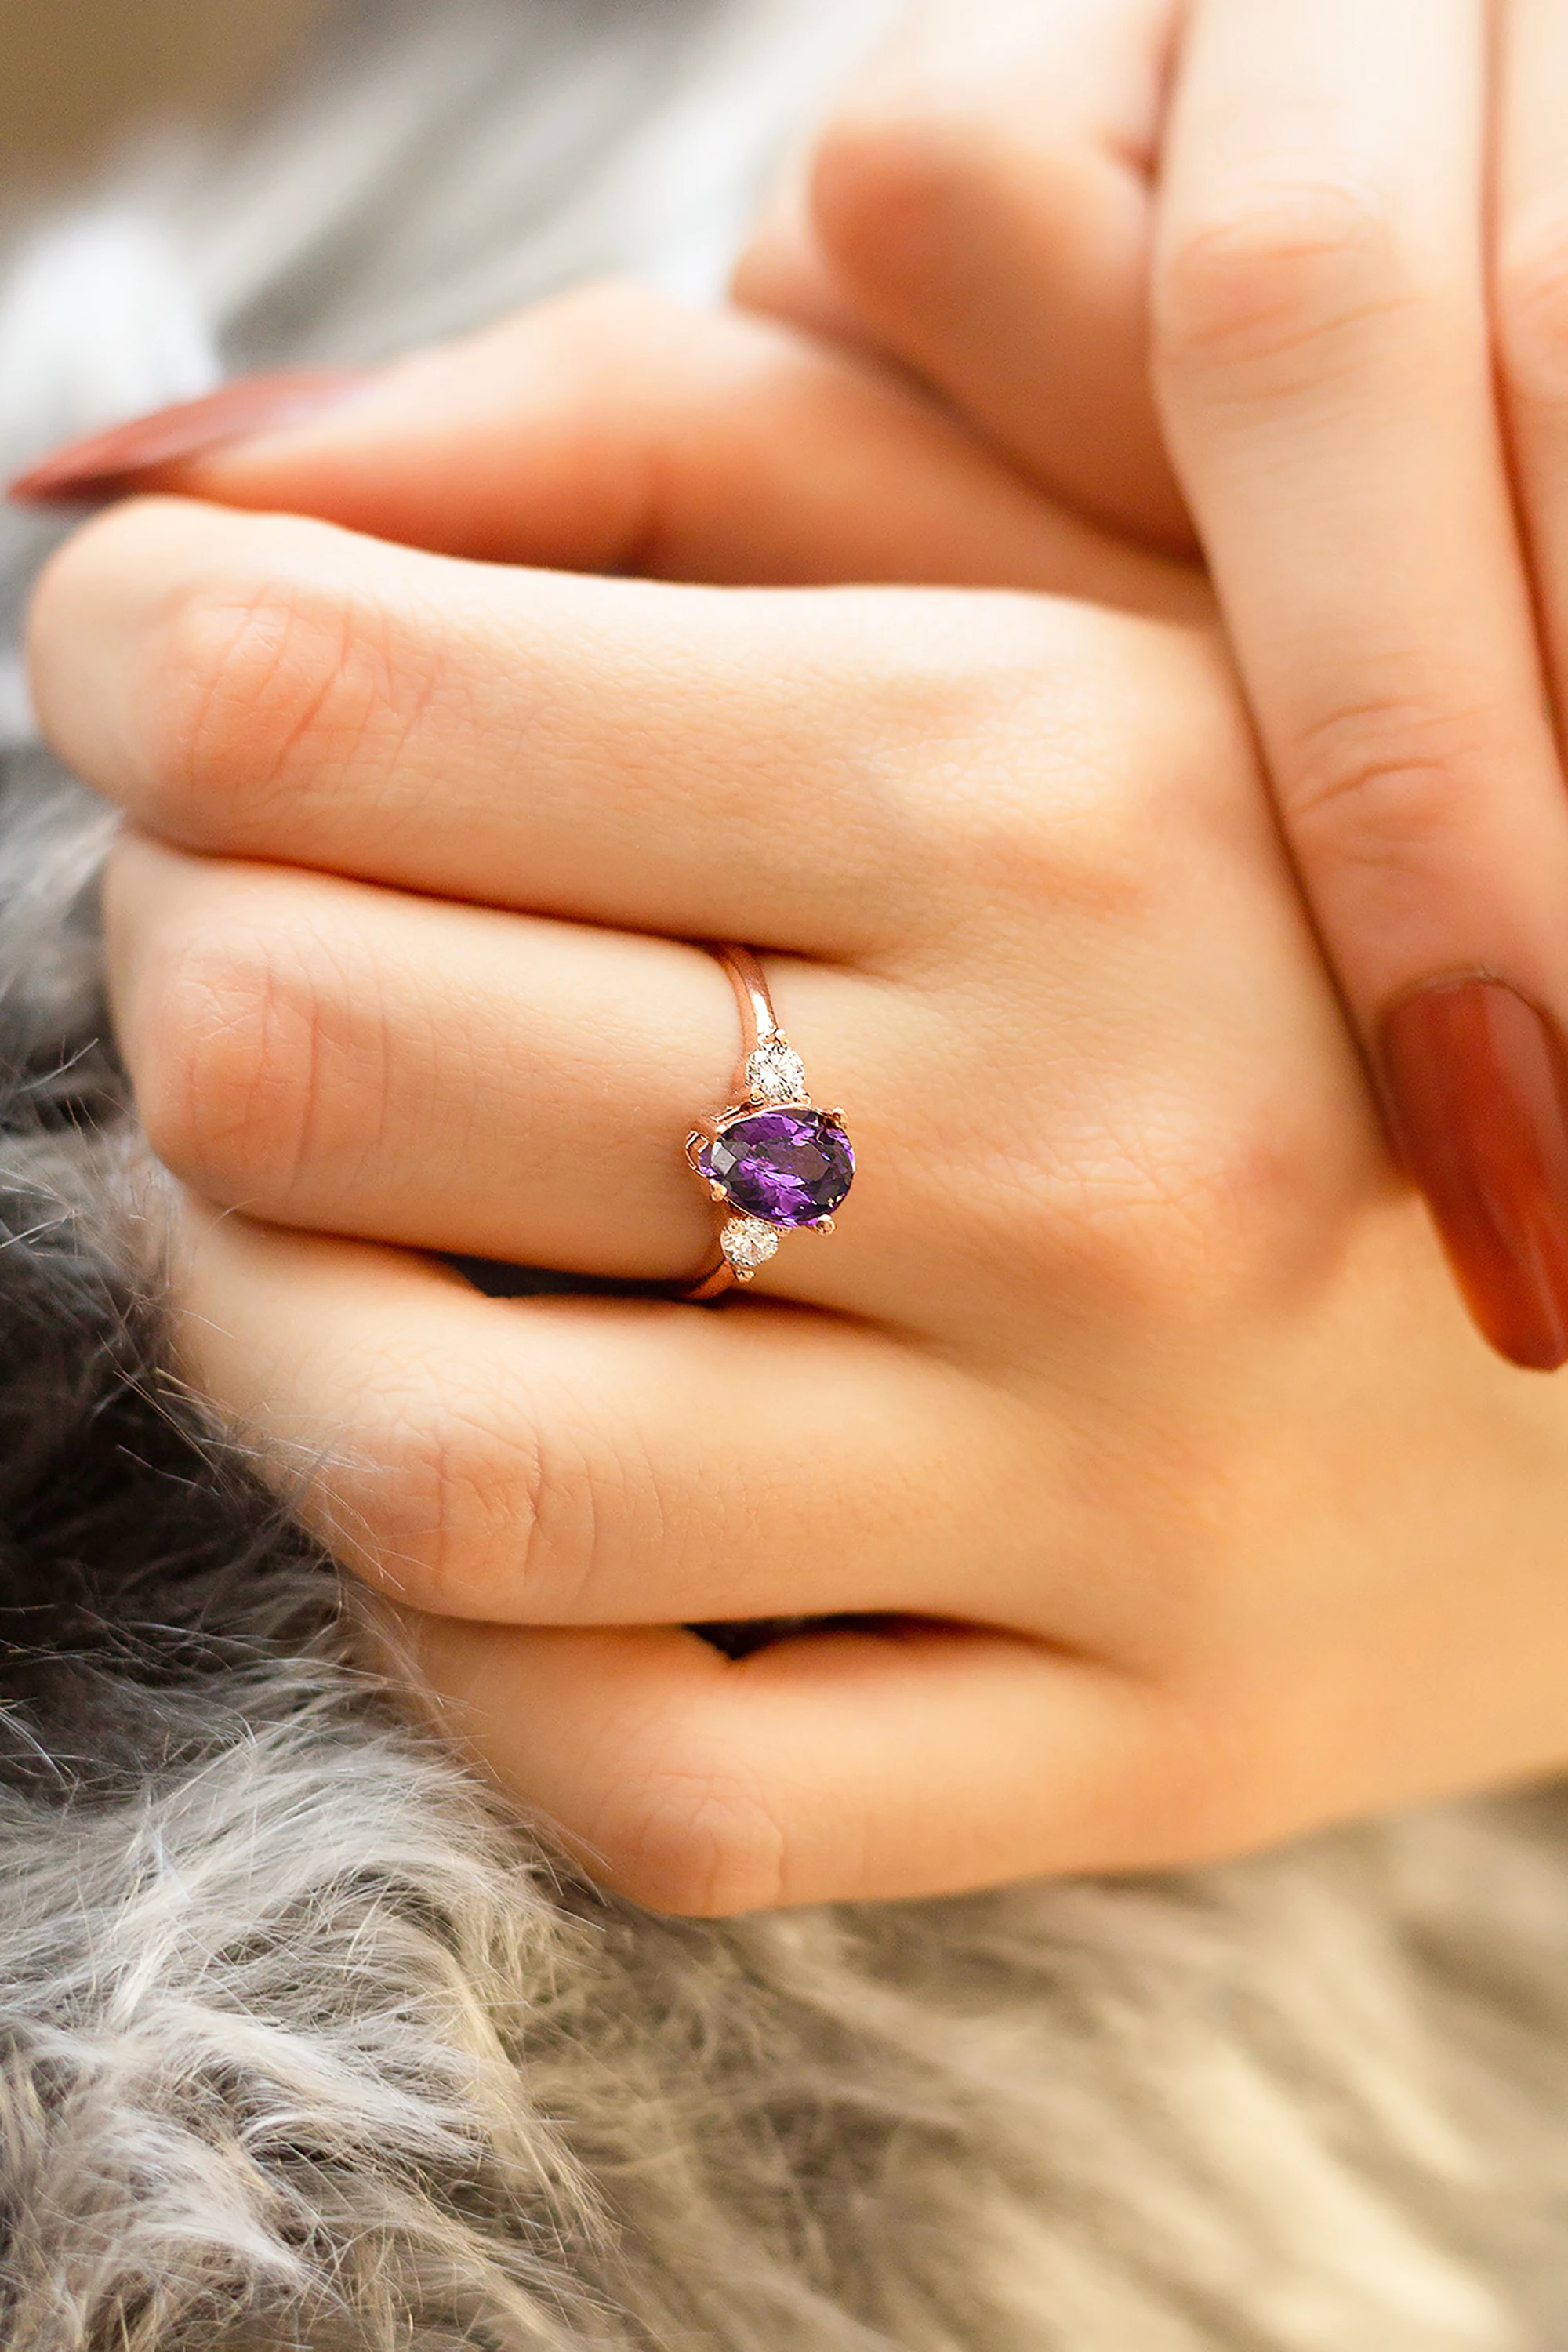 

Purple Ametist Zircon Oval Adjustable Ring With White Gemstone, 925 Sterling Silver, Gift for Her